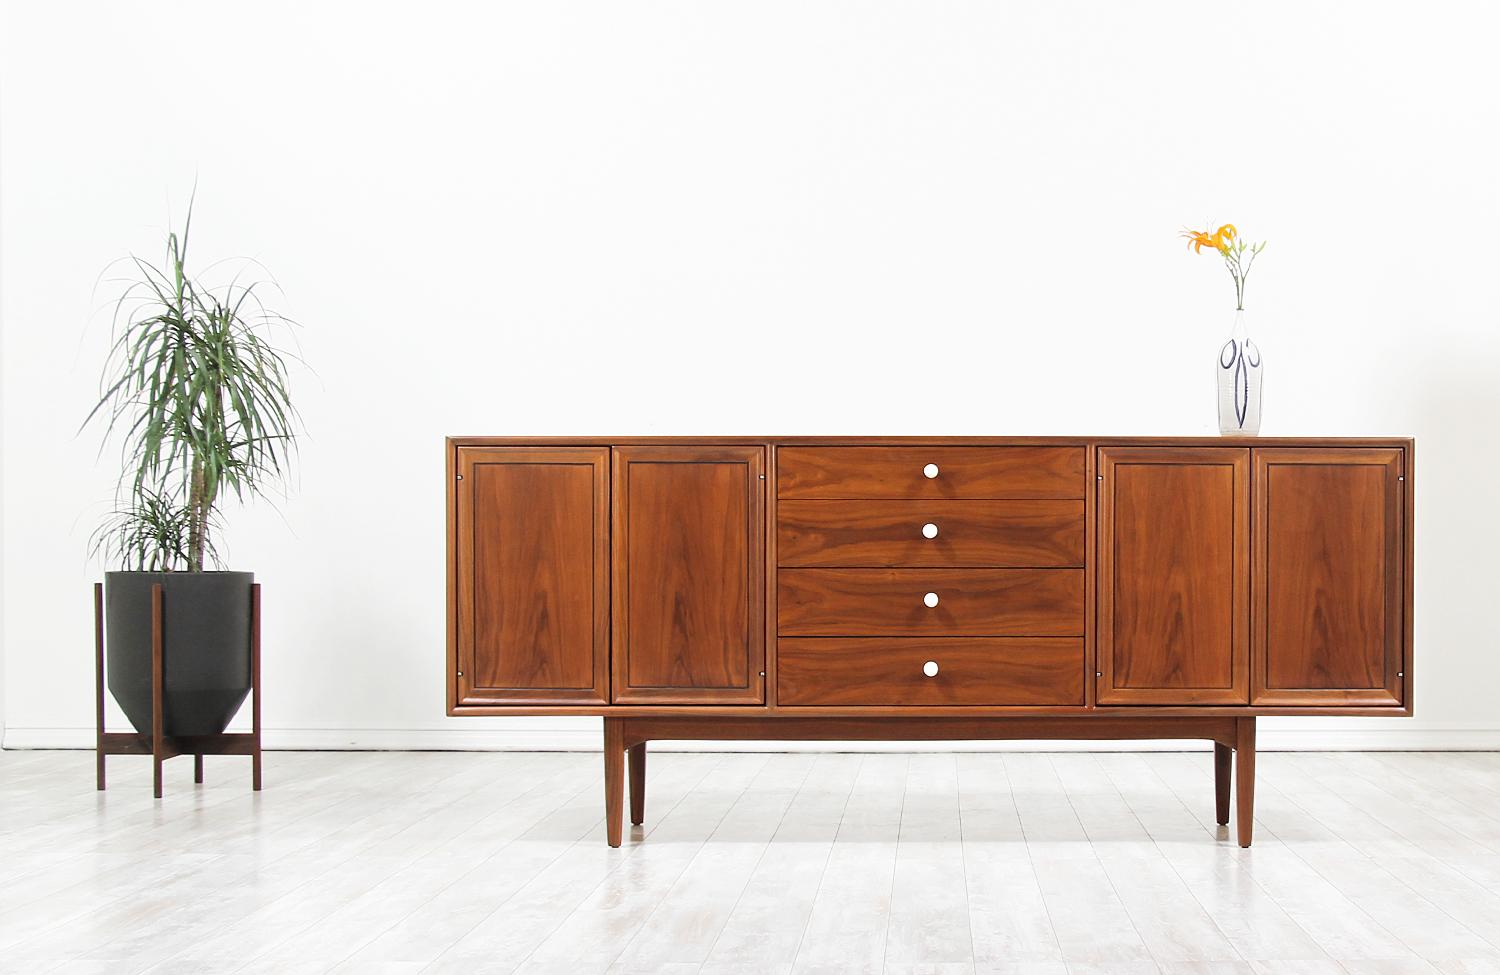 Mid-Century Modern credenza designed by Kipp Stewart & Stewart MacDougall for Drexel’s “Declaration” line in the United States, circa 1950s. This credenza features a solid walnut wood frame accented with the original signature brass & porcelain